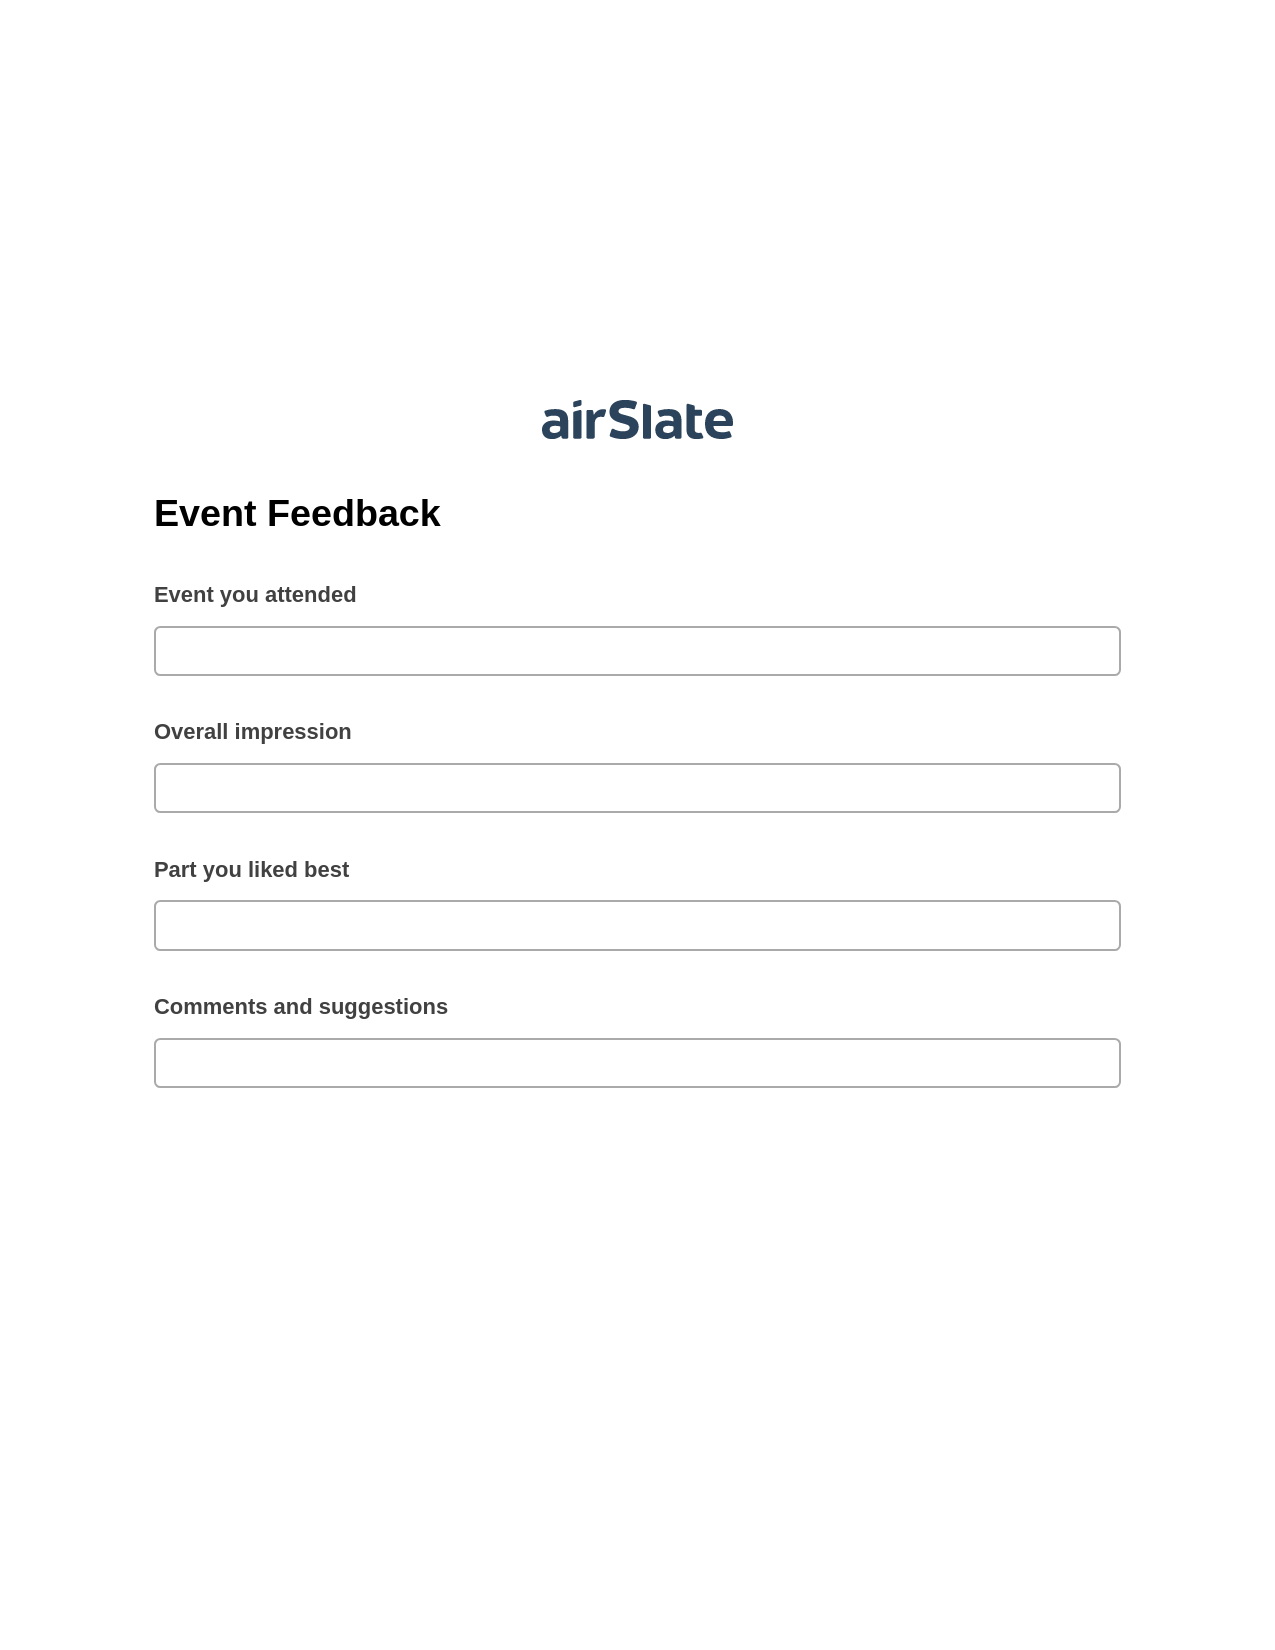 Event Feedback Pre-fill Slate from MS Dynamics 365 Records Bot, Hide Signatures Bot, Export to NetSuite Record Bot